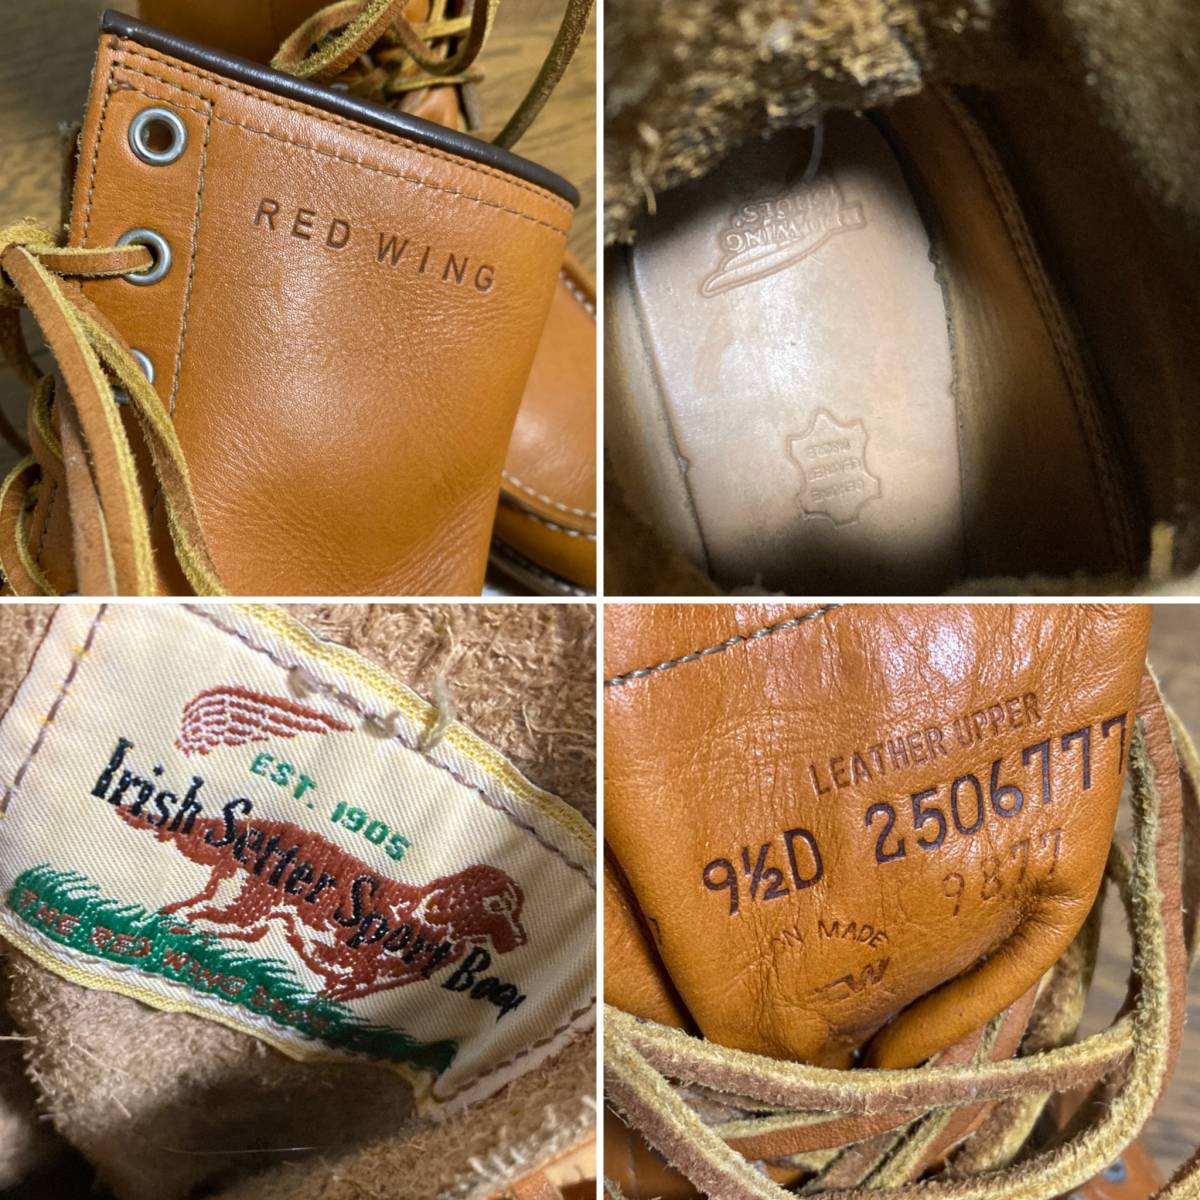 [REDWING] 9877 dog tag reissue Gold la set long Irish setter leather boots 9.5D USA made Red Wing 